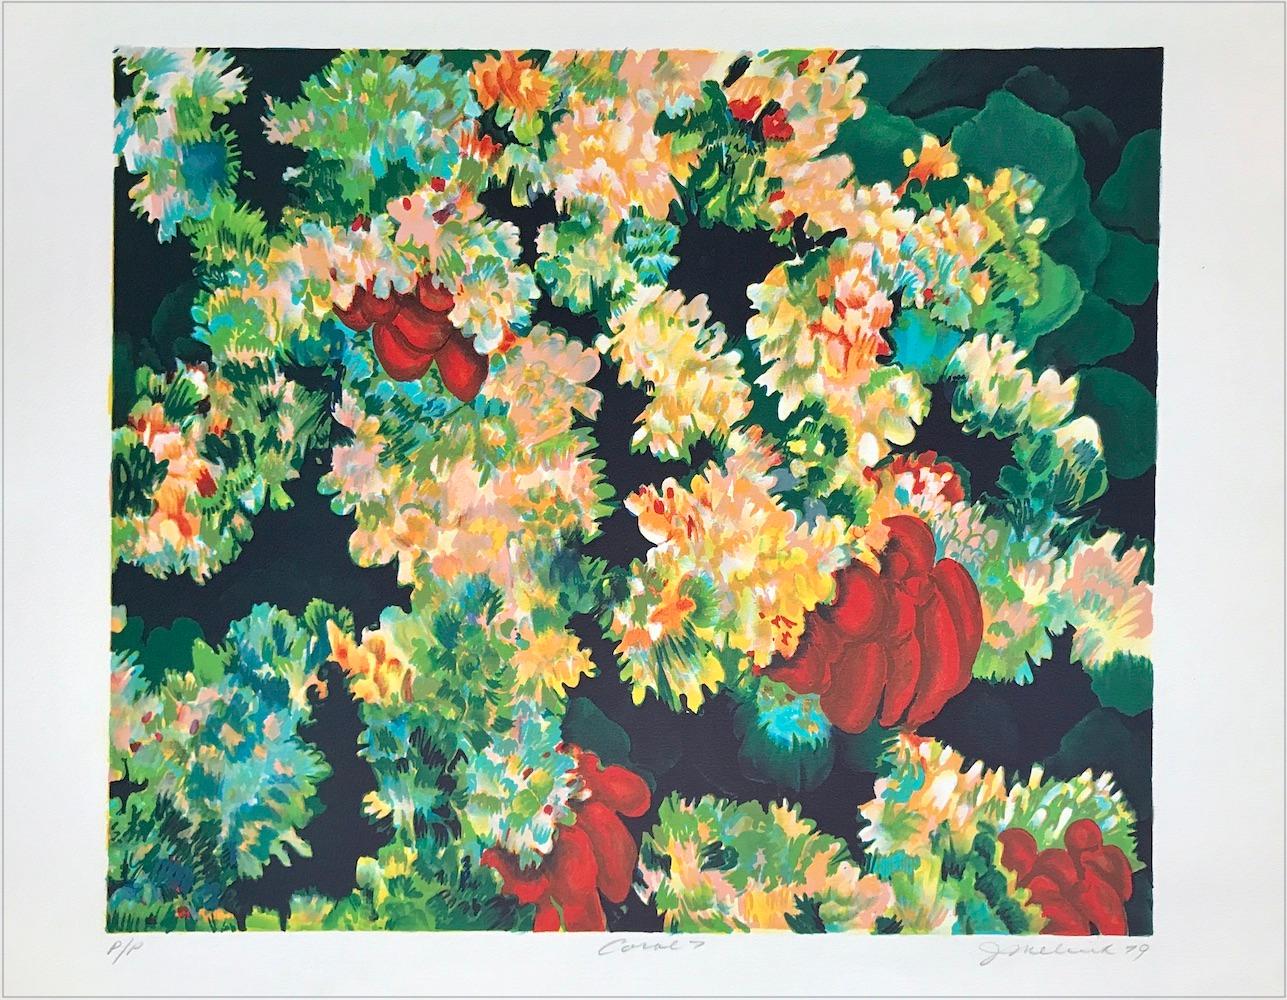 CORAL 7: Dark Green, Red, Signed Lithograph, Nature Abstract Coral Reef Sea Life